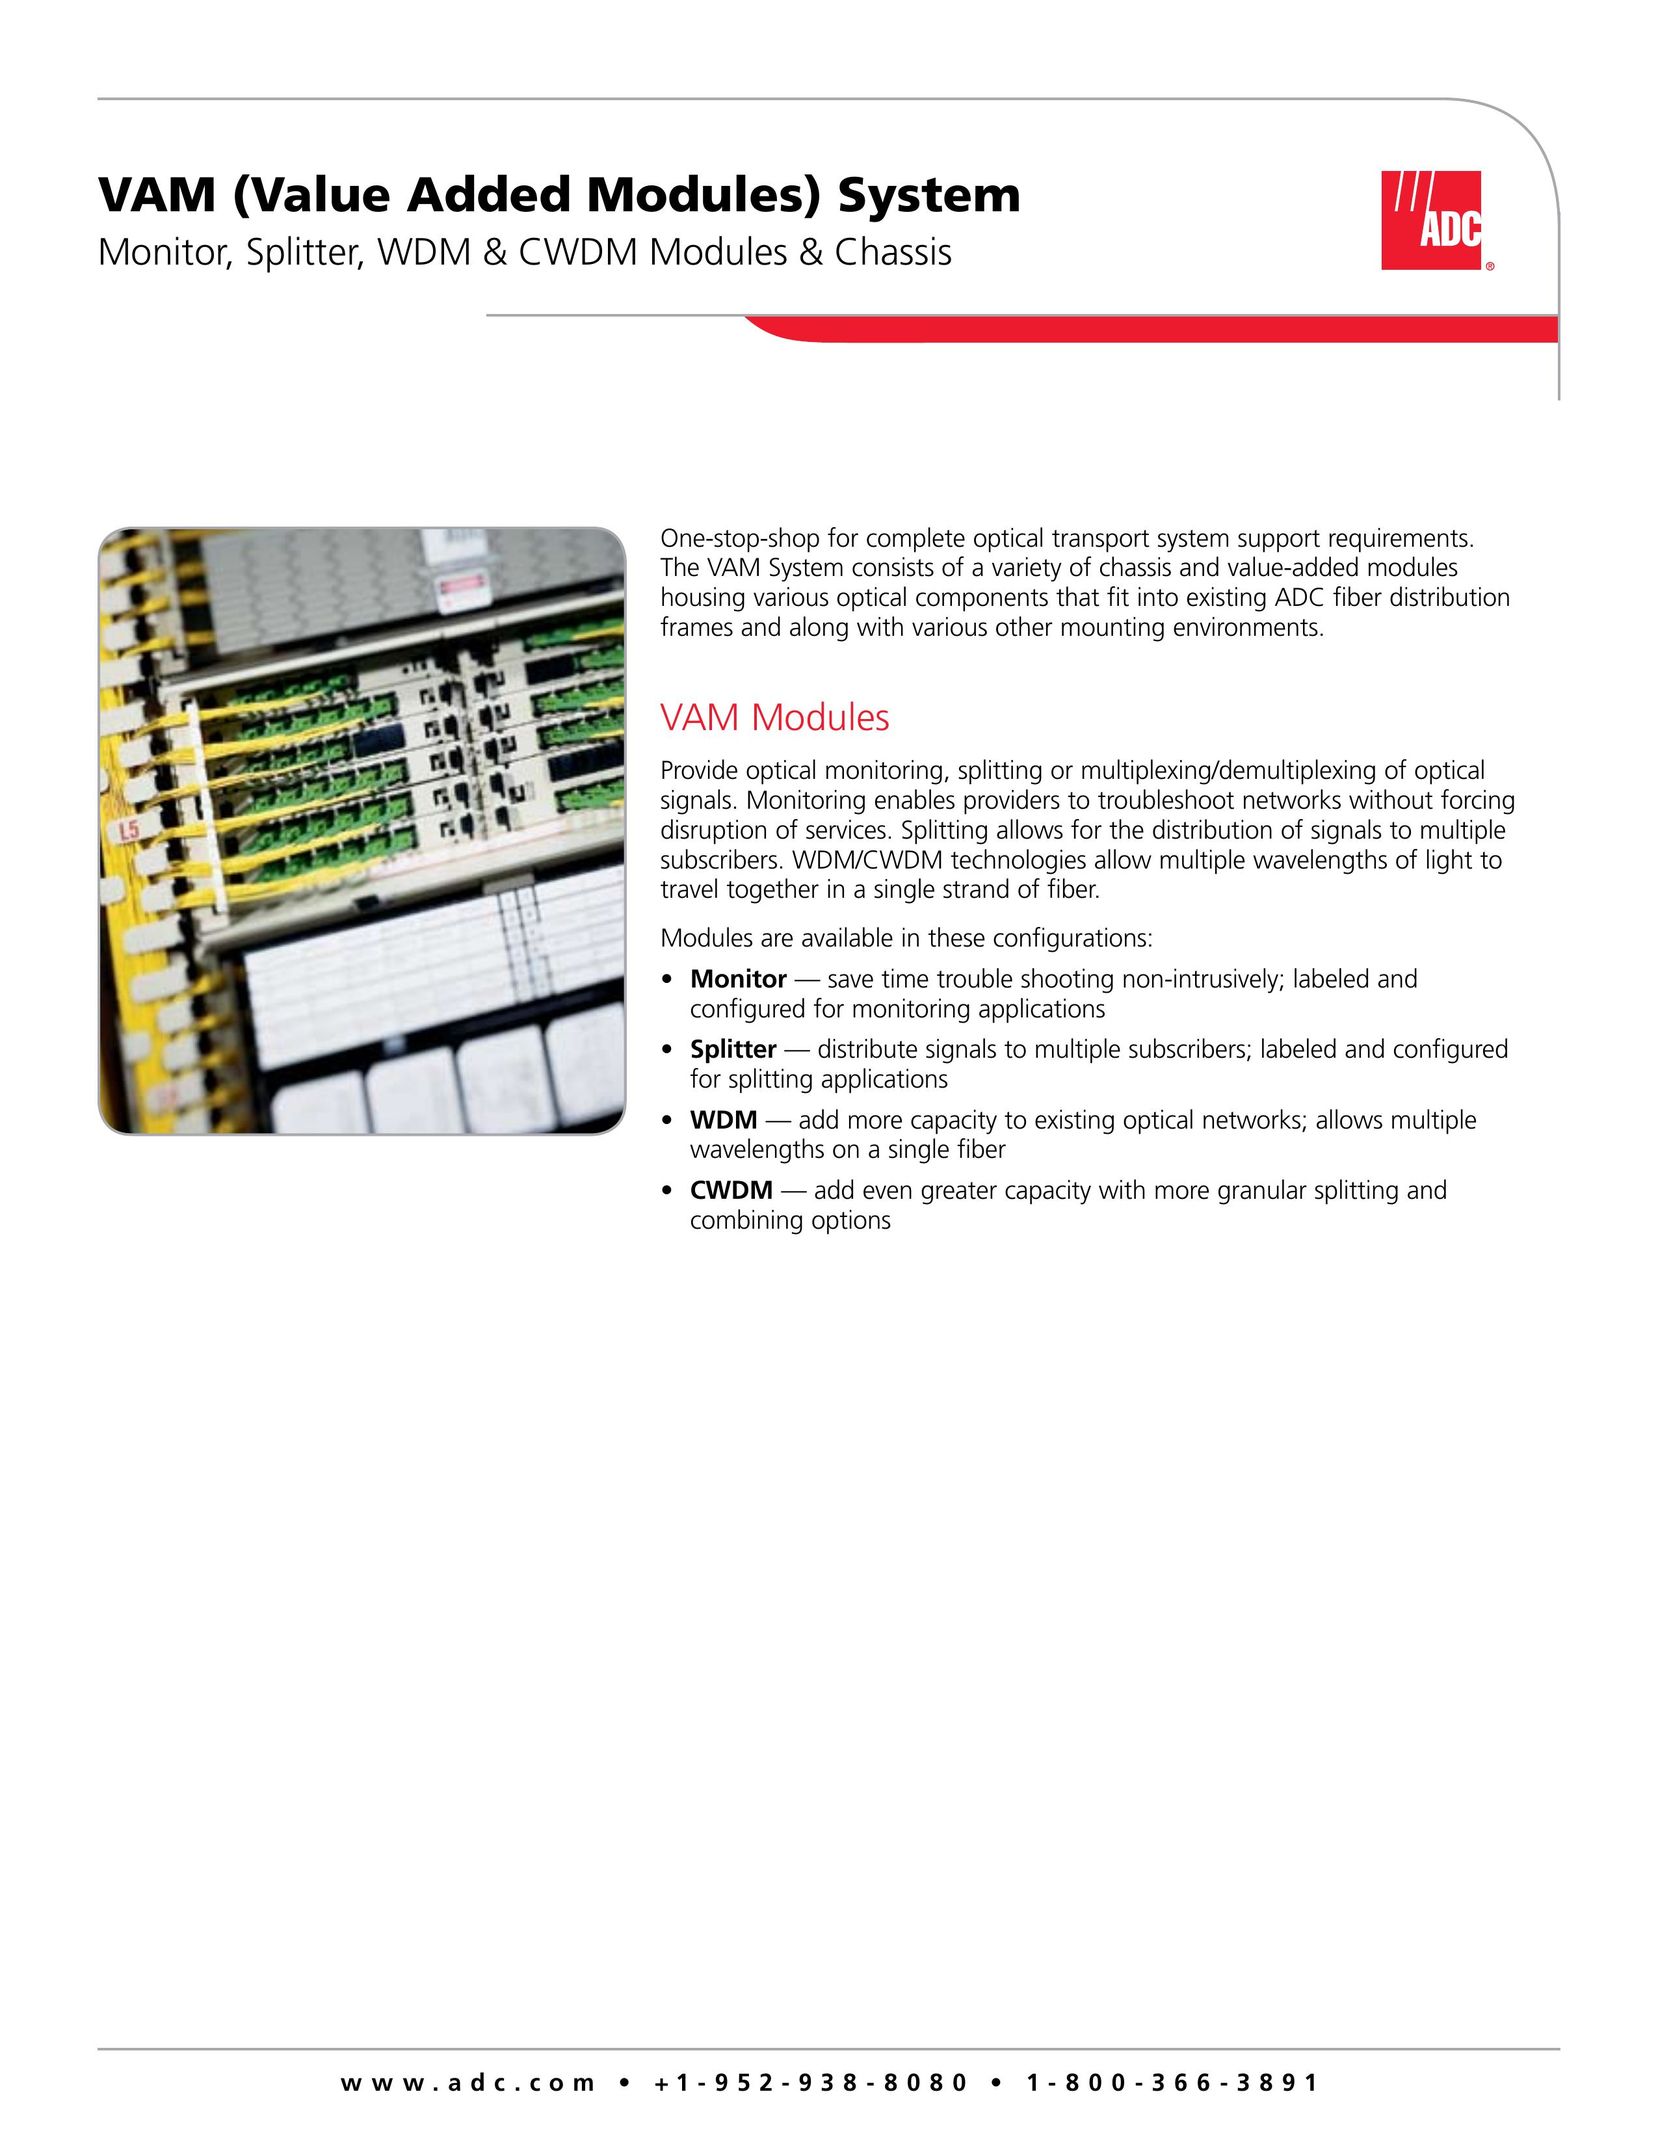 ADC VAM (Value Added Modules) System Network Router User Manual